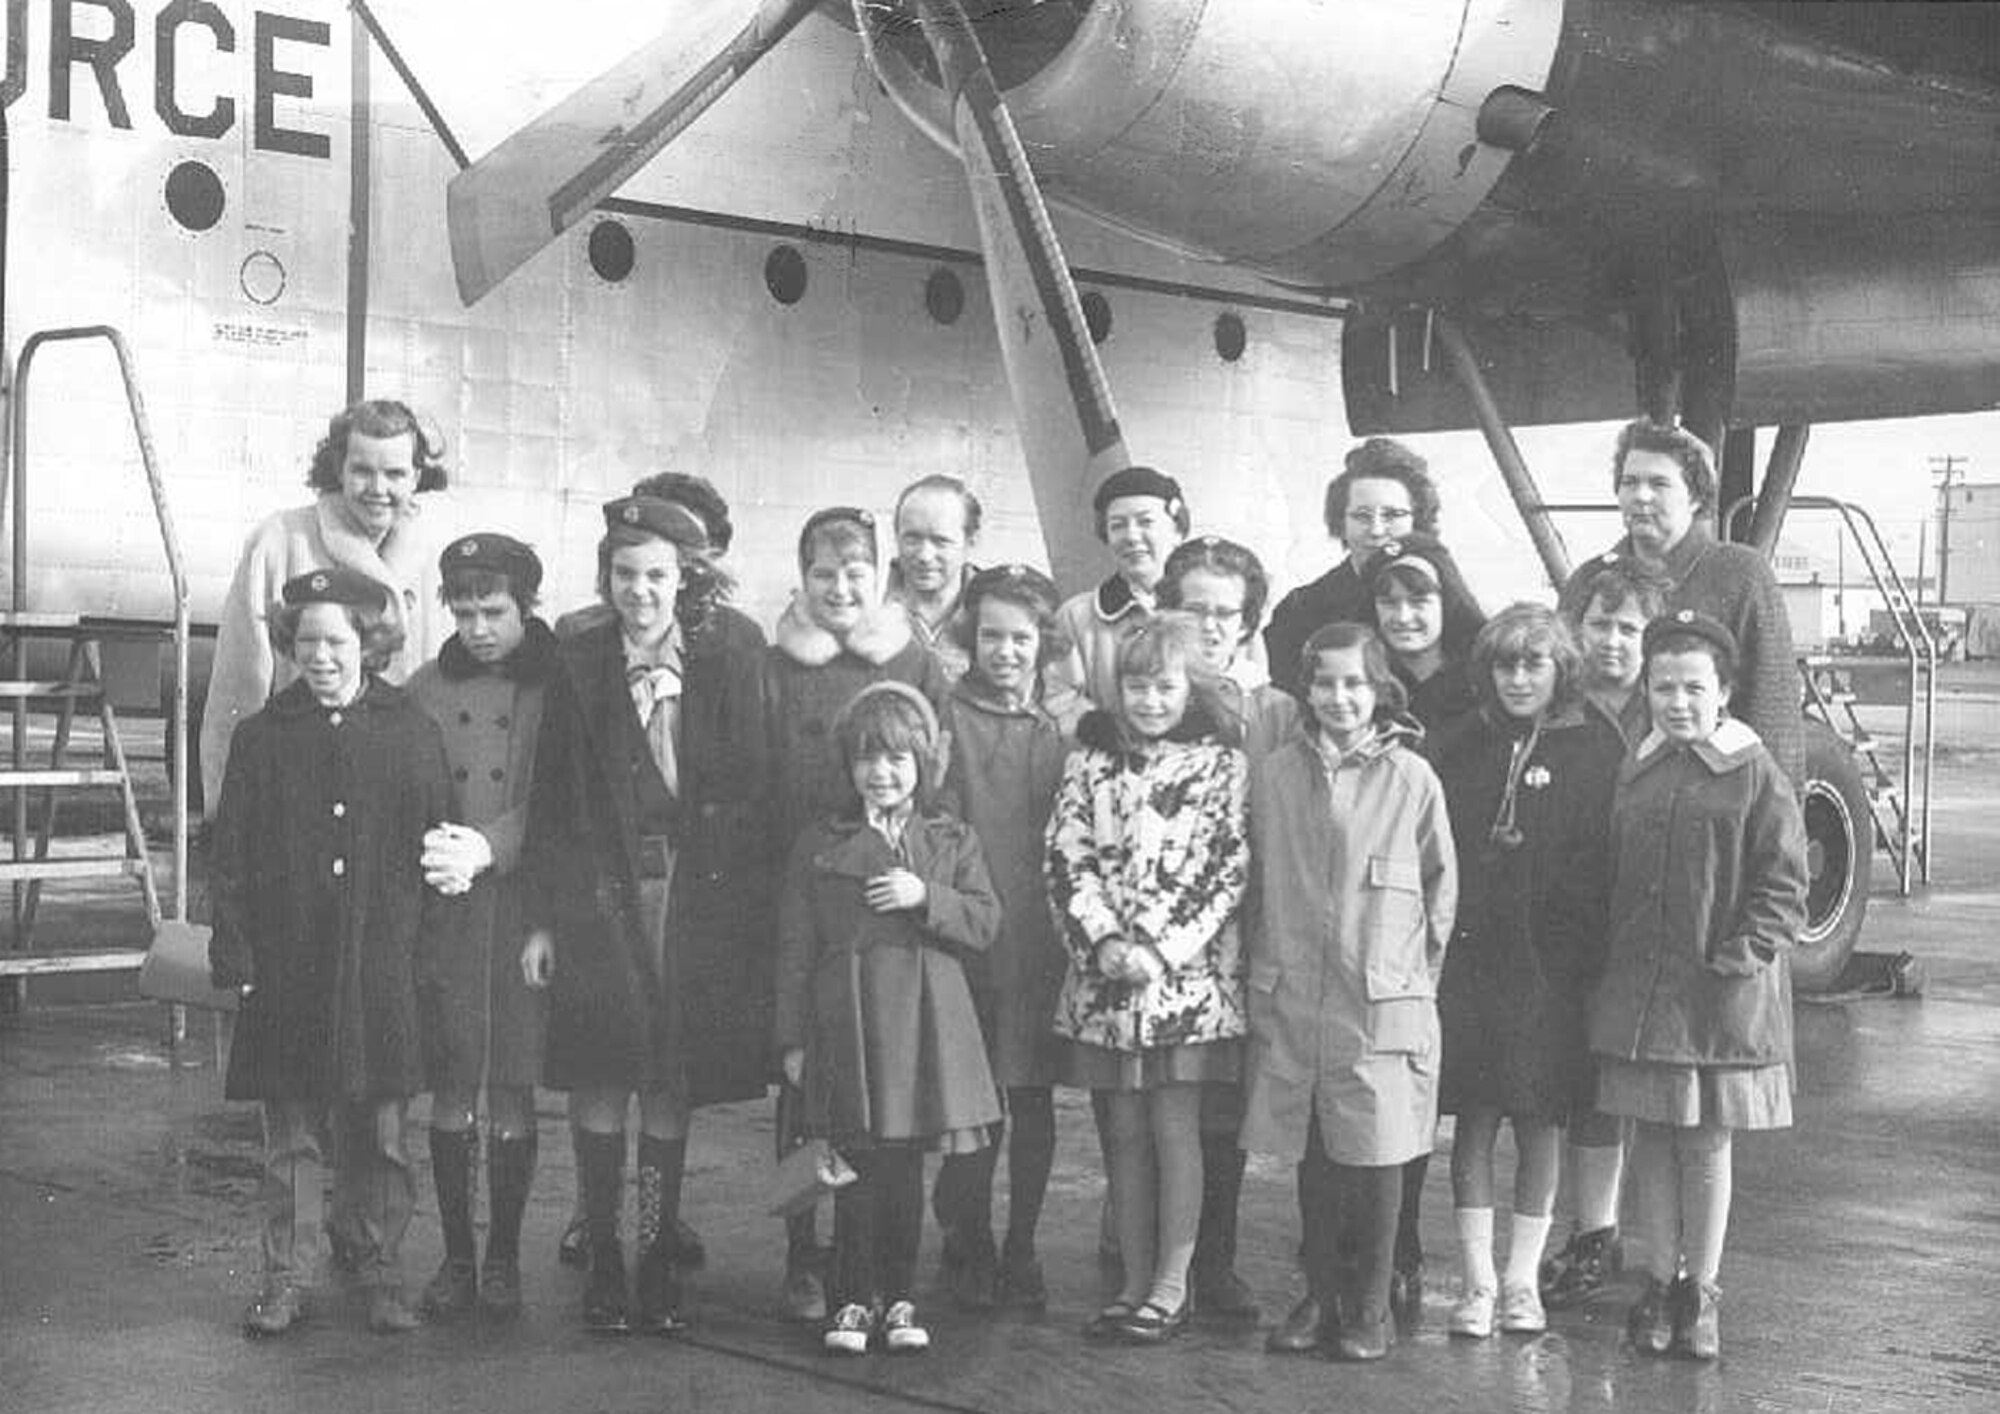 HANSCOM AFB, Mass., -- Chief Master Sgt. Snow’s wife, Catherine, back row, first on left; daughter, Madelyn, front row, third from left; and daughter, Barbara, front row, center, attend a school field trip to Hanscom and pose in front of a C-119. (Courtesy Photo)